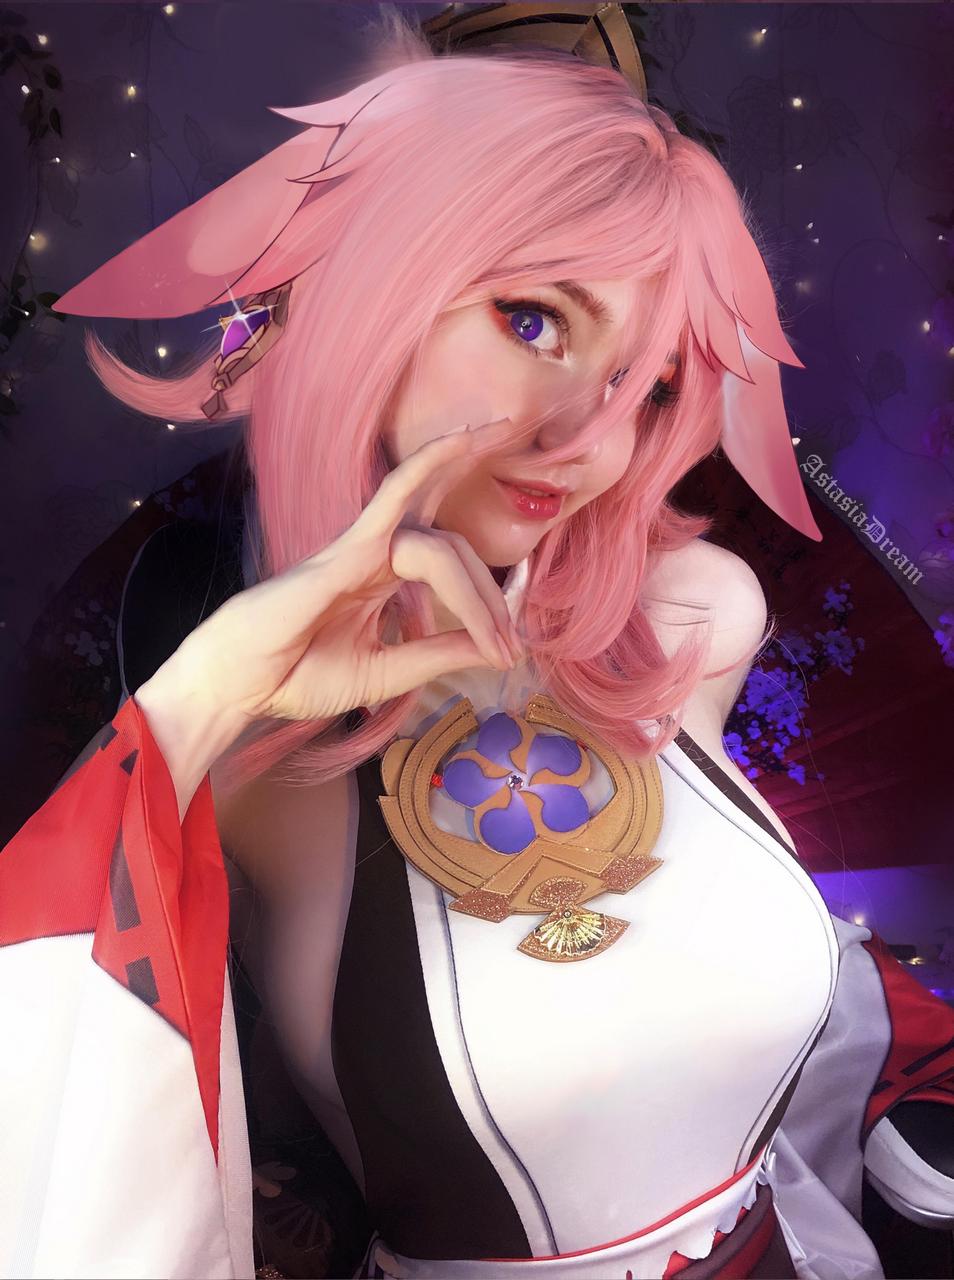 Some Little Cosplay On Yae Mik